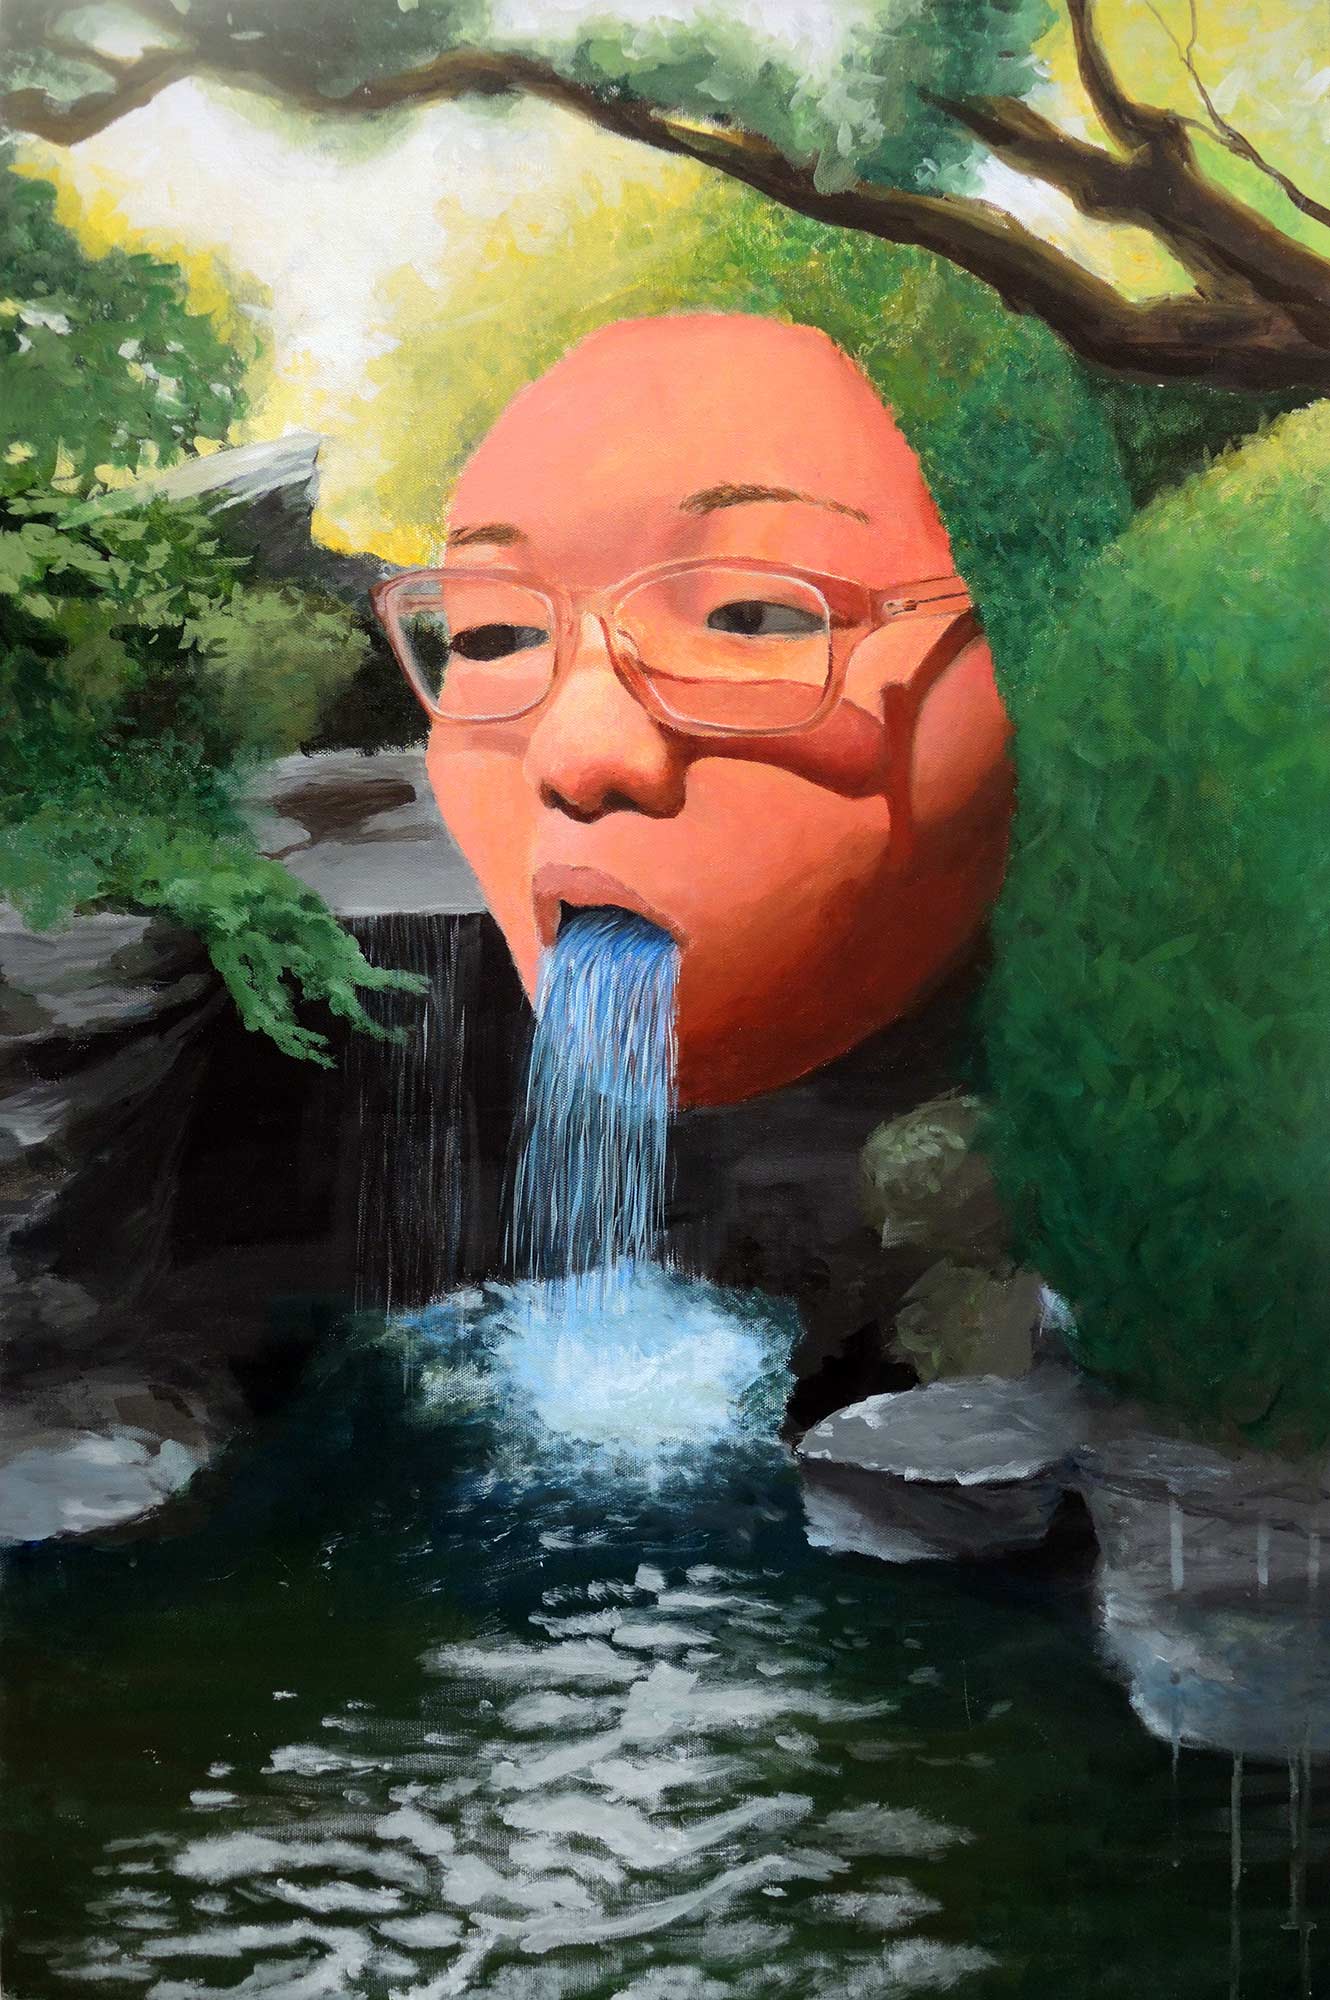 A painting of a face with a waterfall coming from its mouth